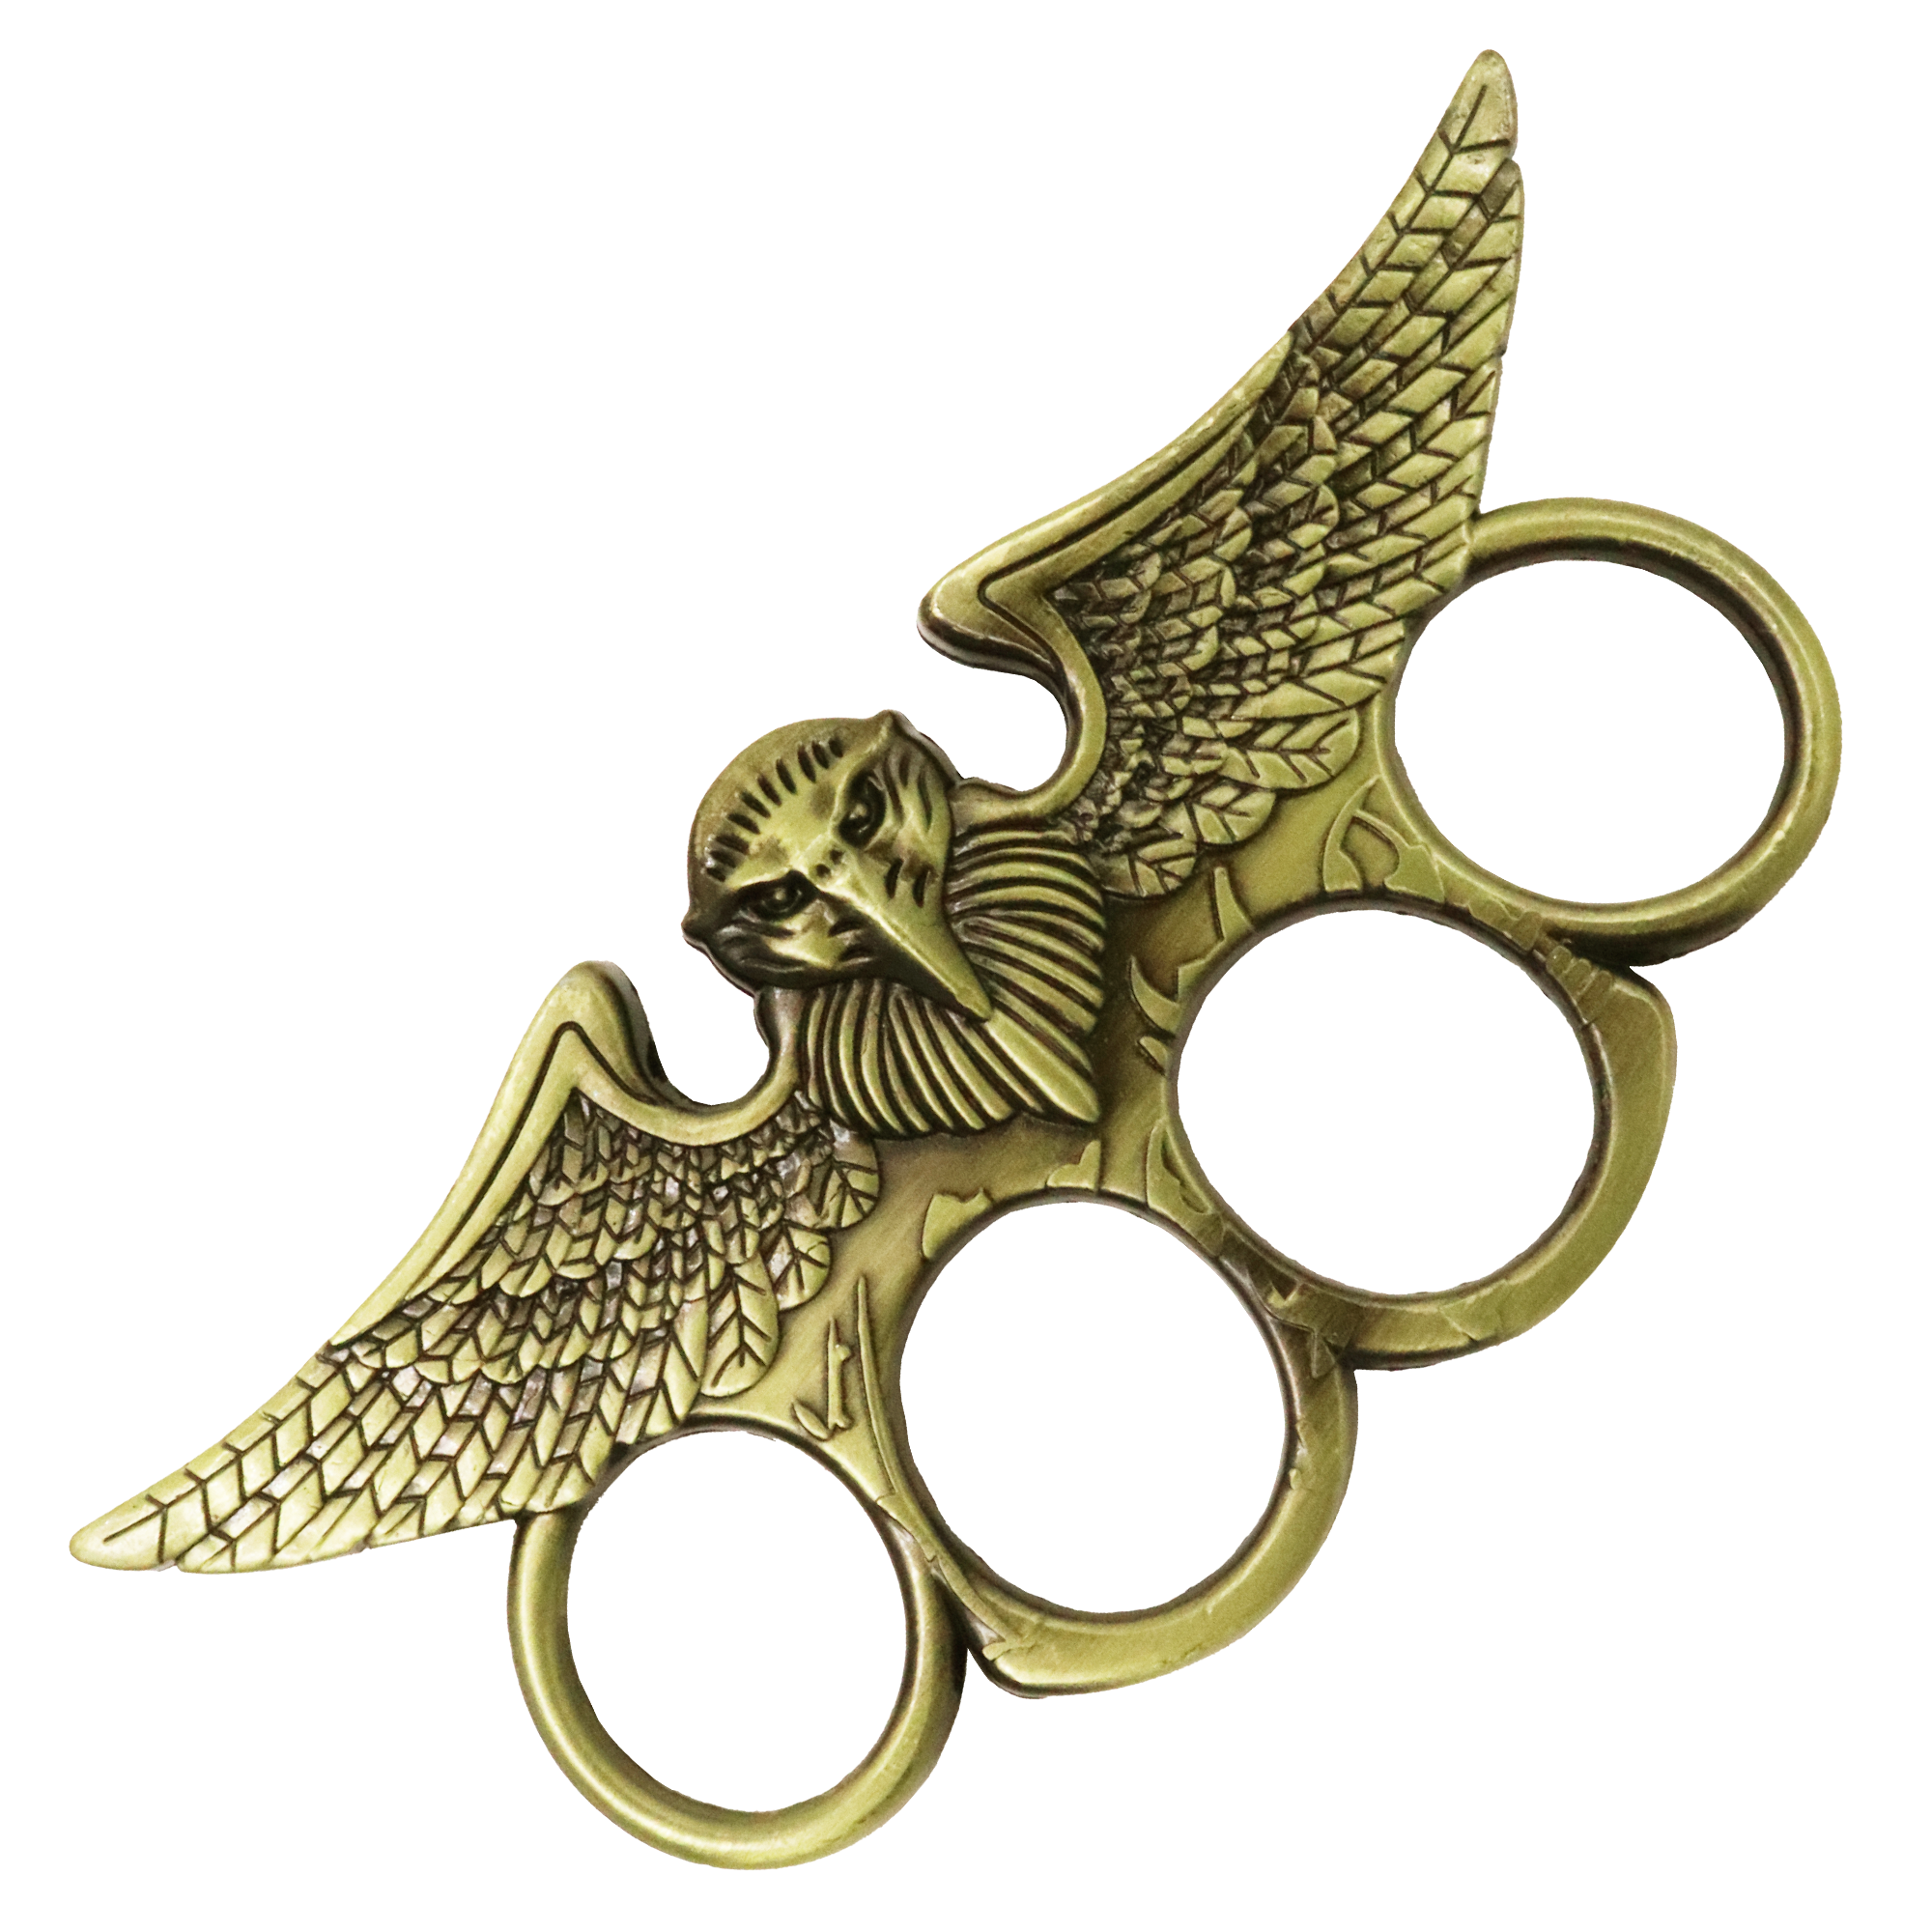 Polish Legions belt buckle, brass version with brass eagle - repro 24,75 €